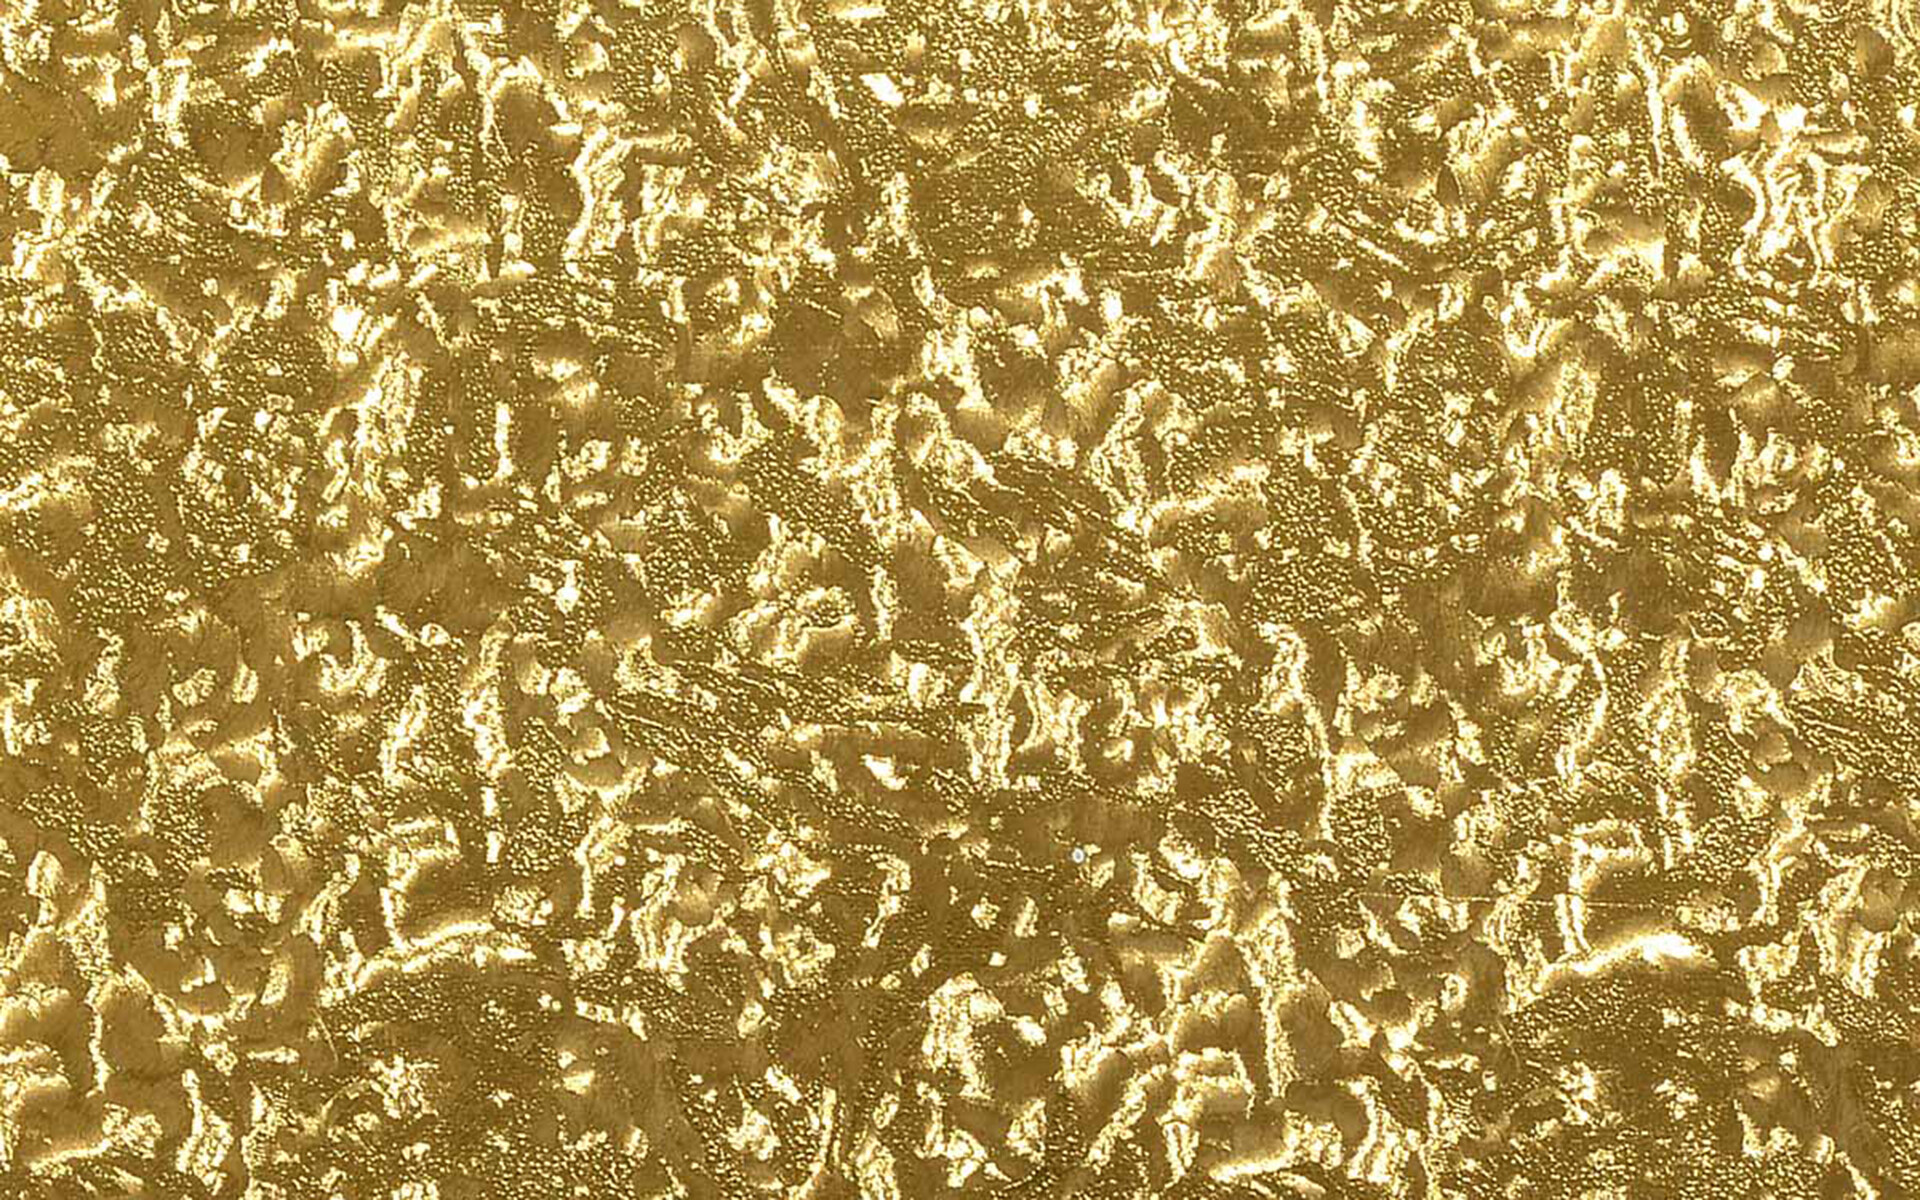 Gold Foil: The gilt, A precious appearance at a fraction of the cost of creating a solid metal object. 1920x1200 HD Wallpaper.